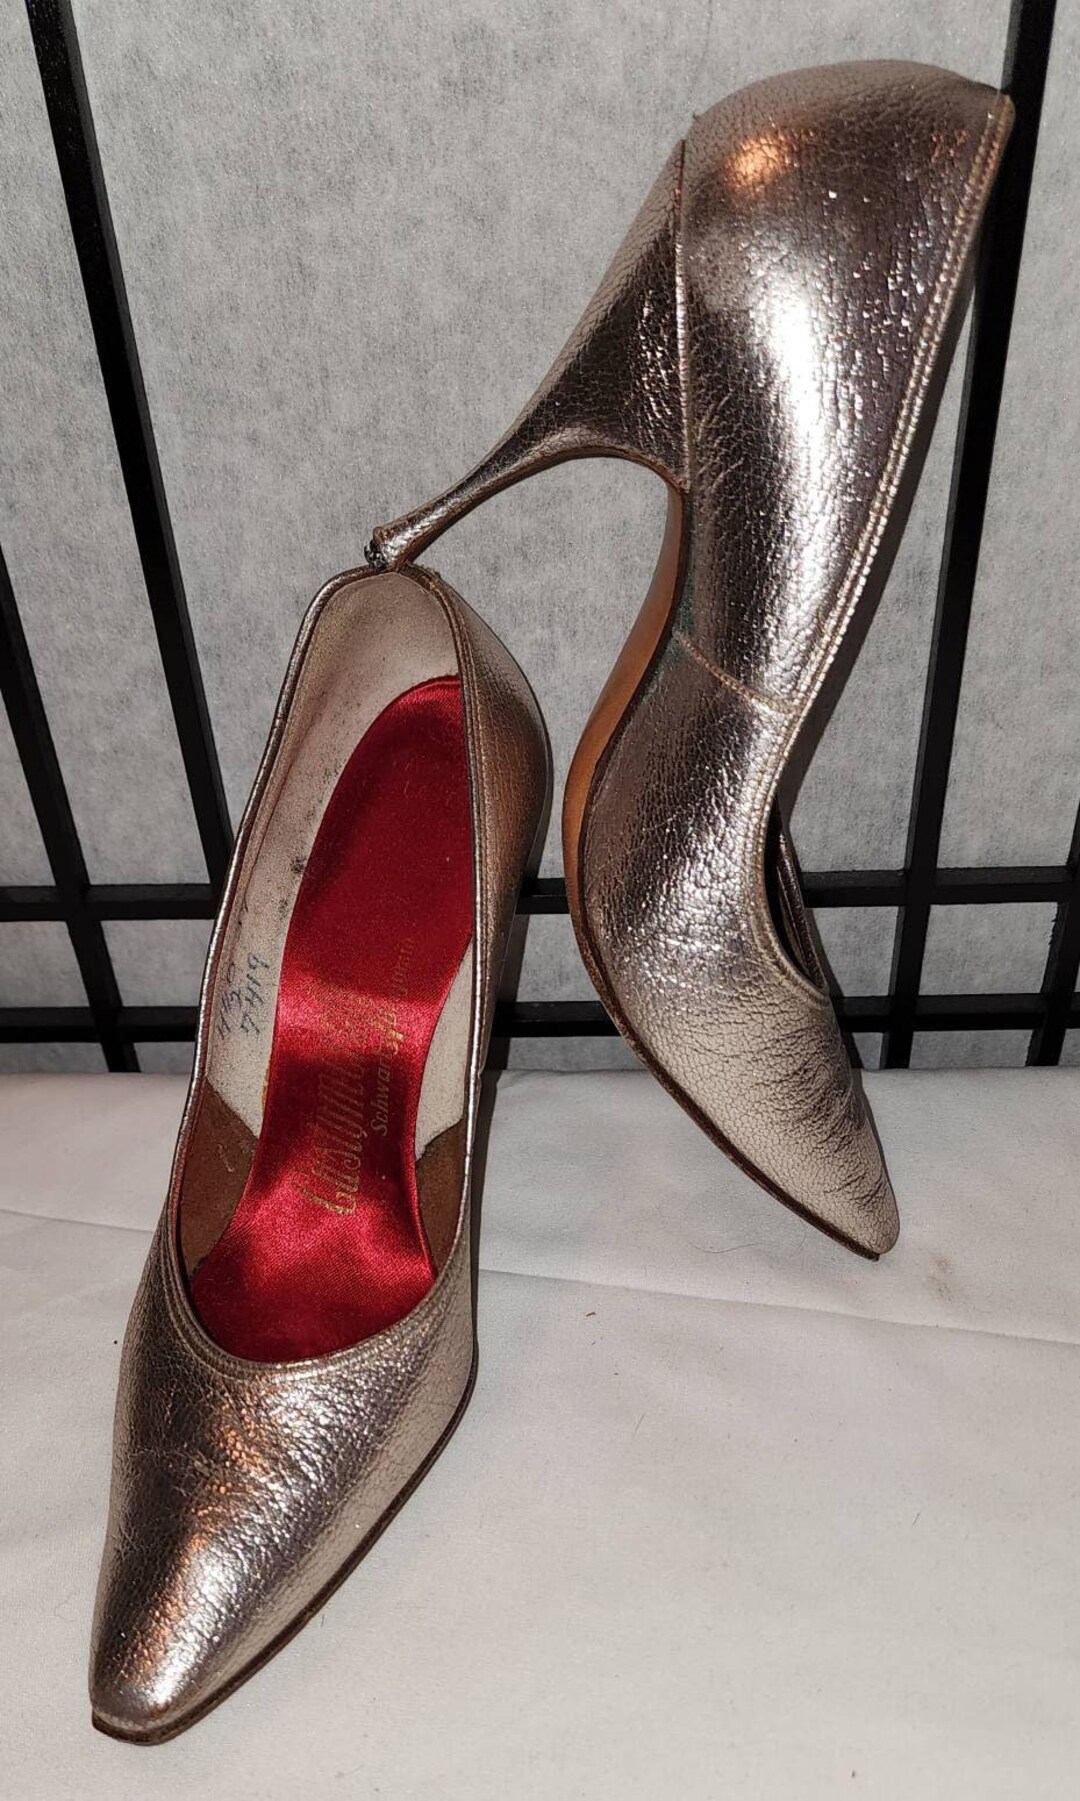 Vintage Silver Shoes 1950s 60s Silver Metallic Leather or - Etsy